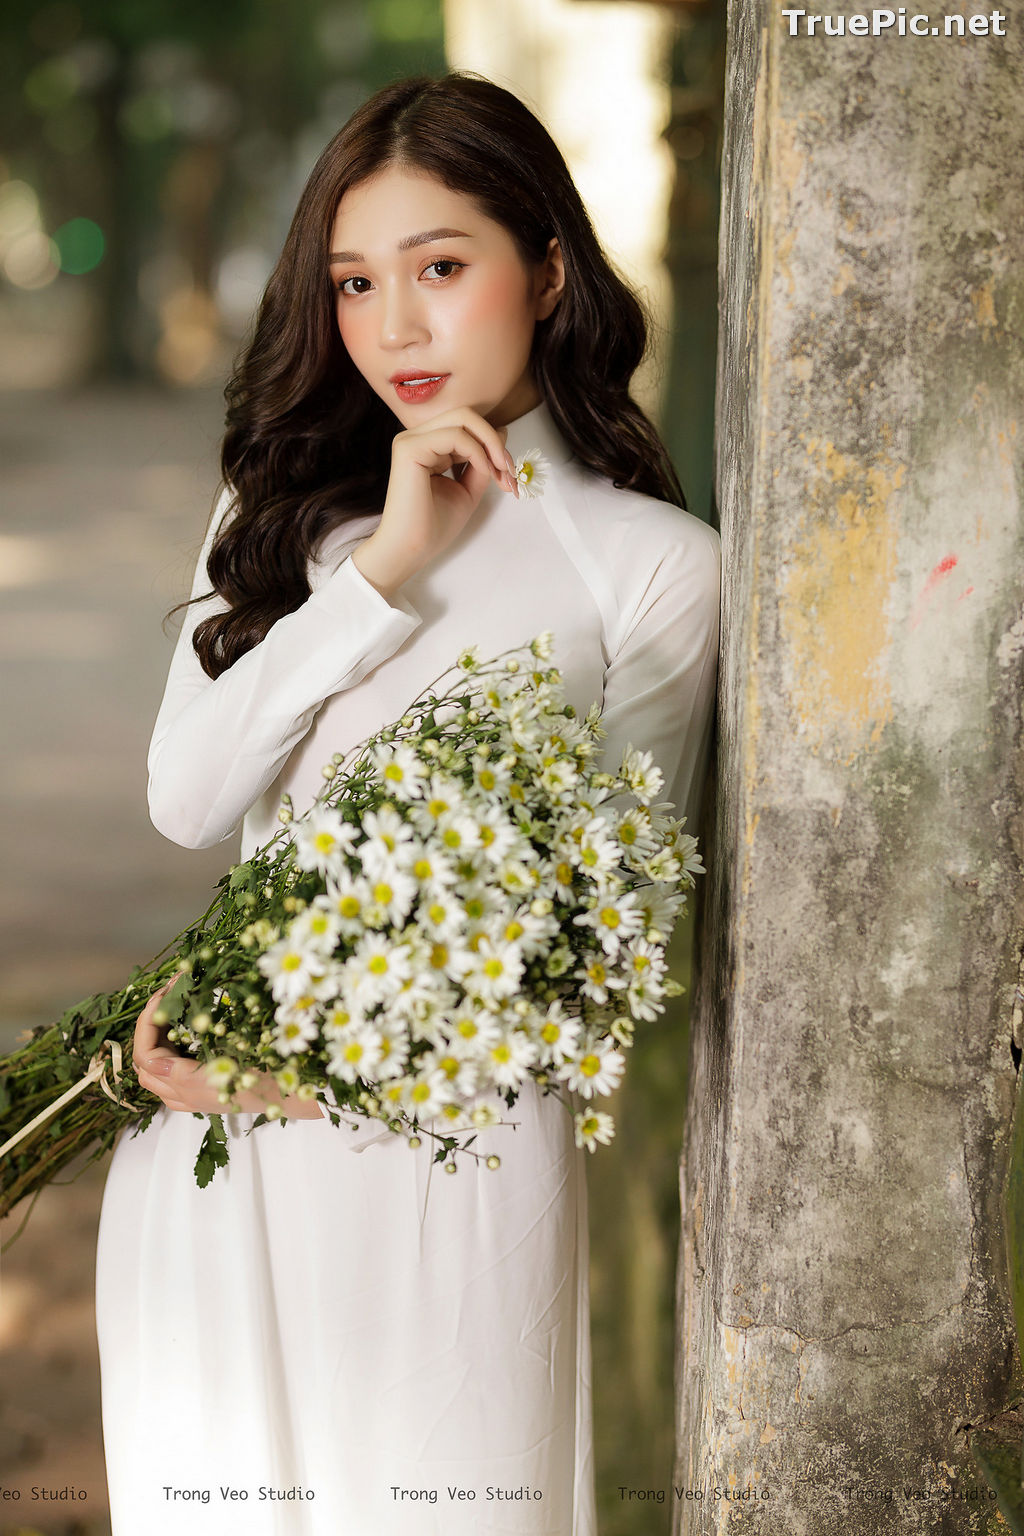 Image The Beauty of Vietnamese Girls with Traditional Dress (Ao Dai) #1 - TruePic.net - Picture-22